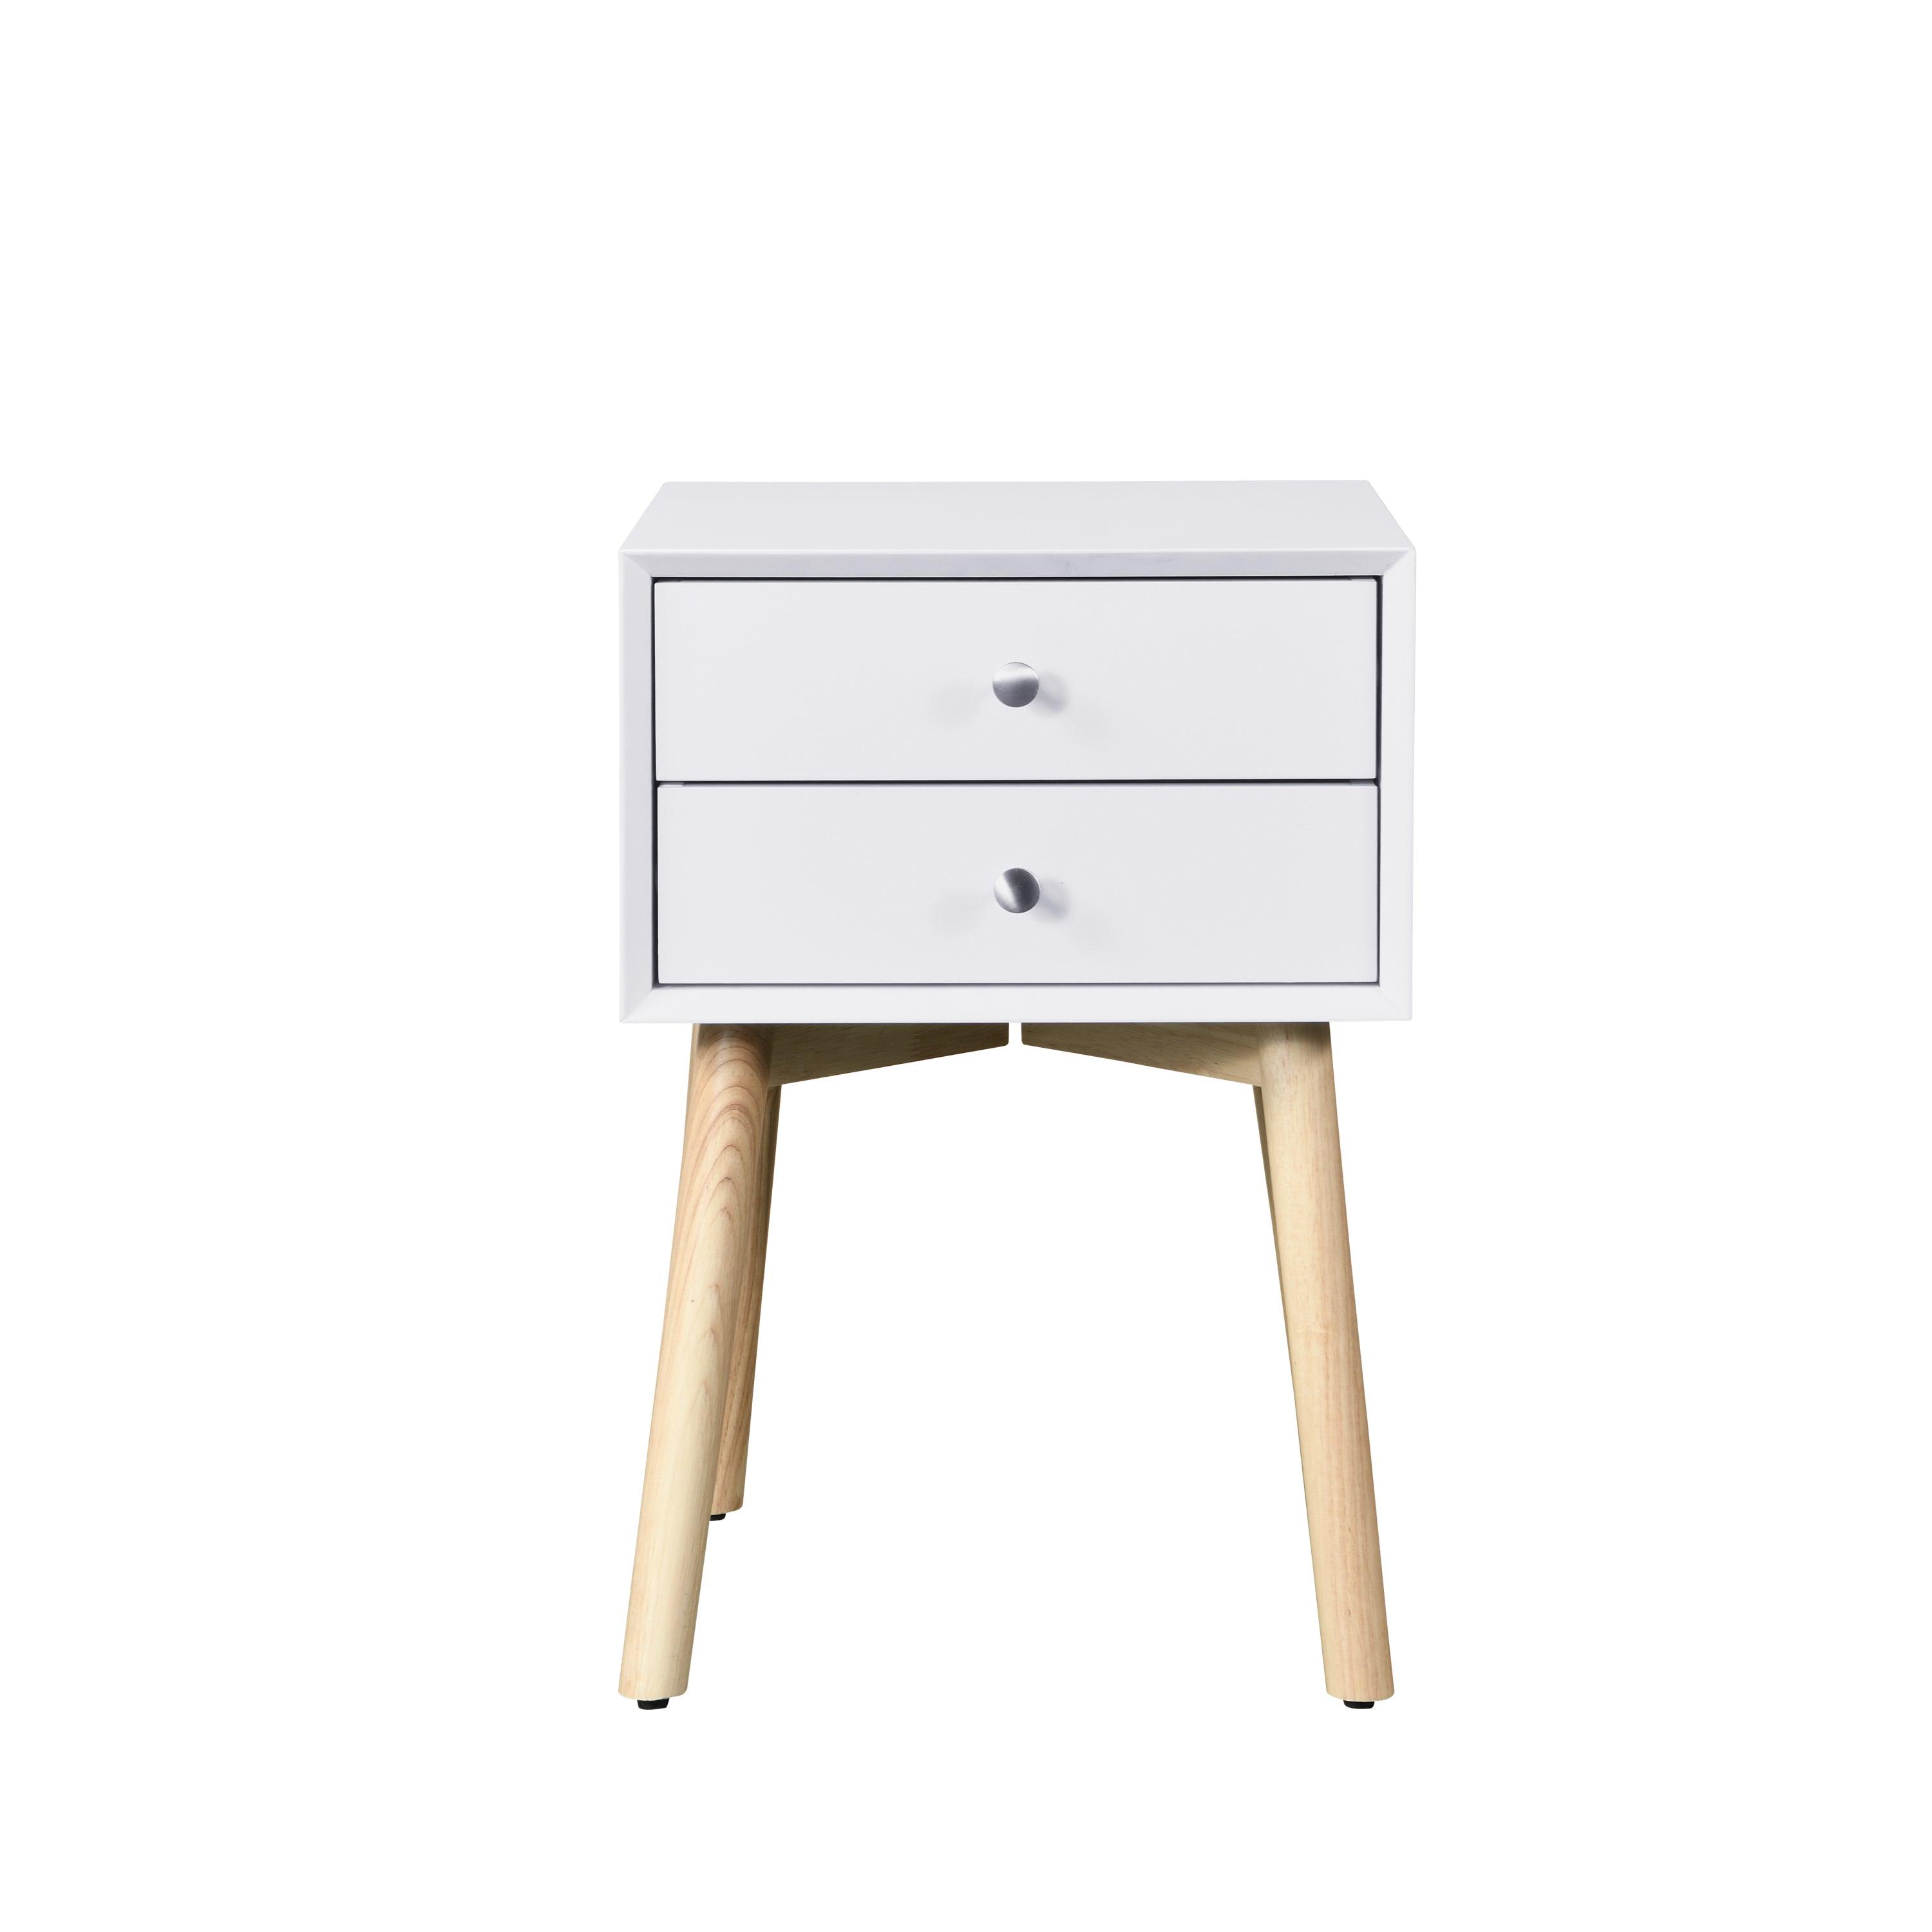 🆓🚛 Side Table, Bedside Table With 2 Drawers & Rubber Wood Legs, Mid-Century Modern Storage Cabinet for Bedroom Living Room, White